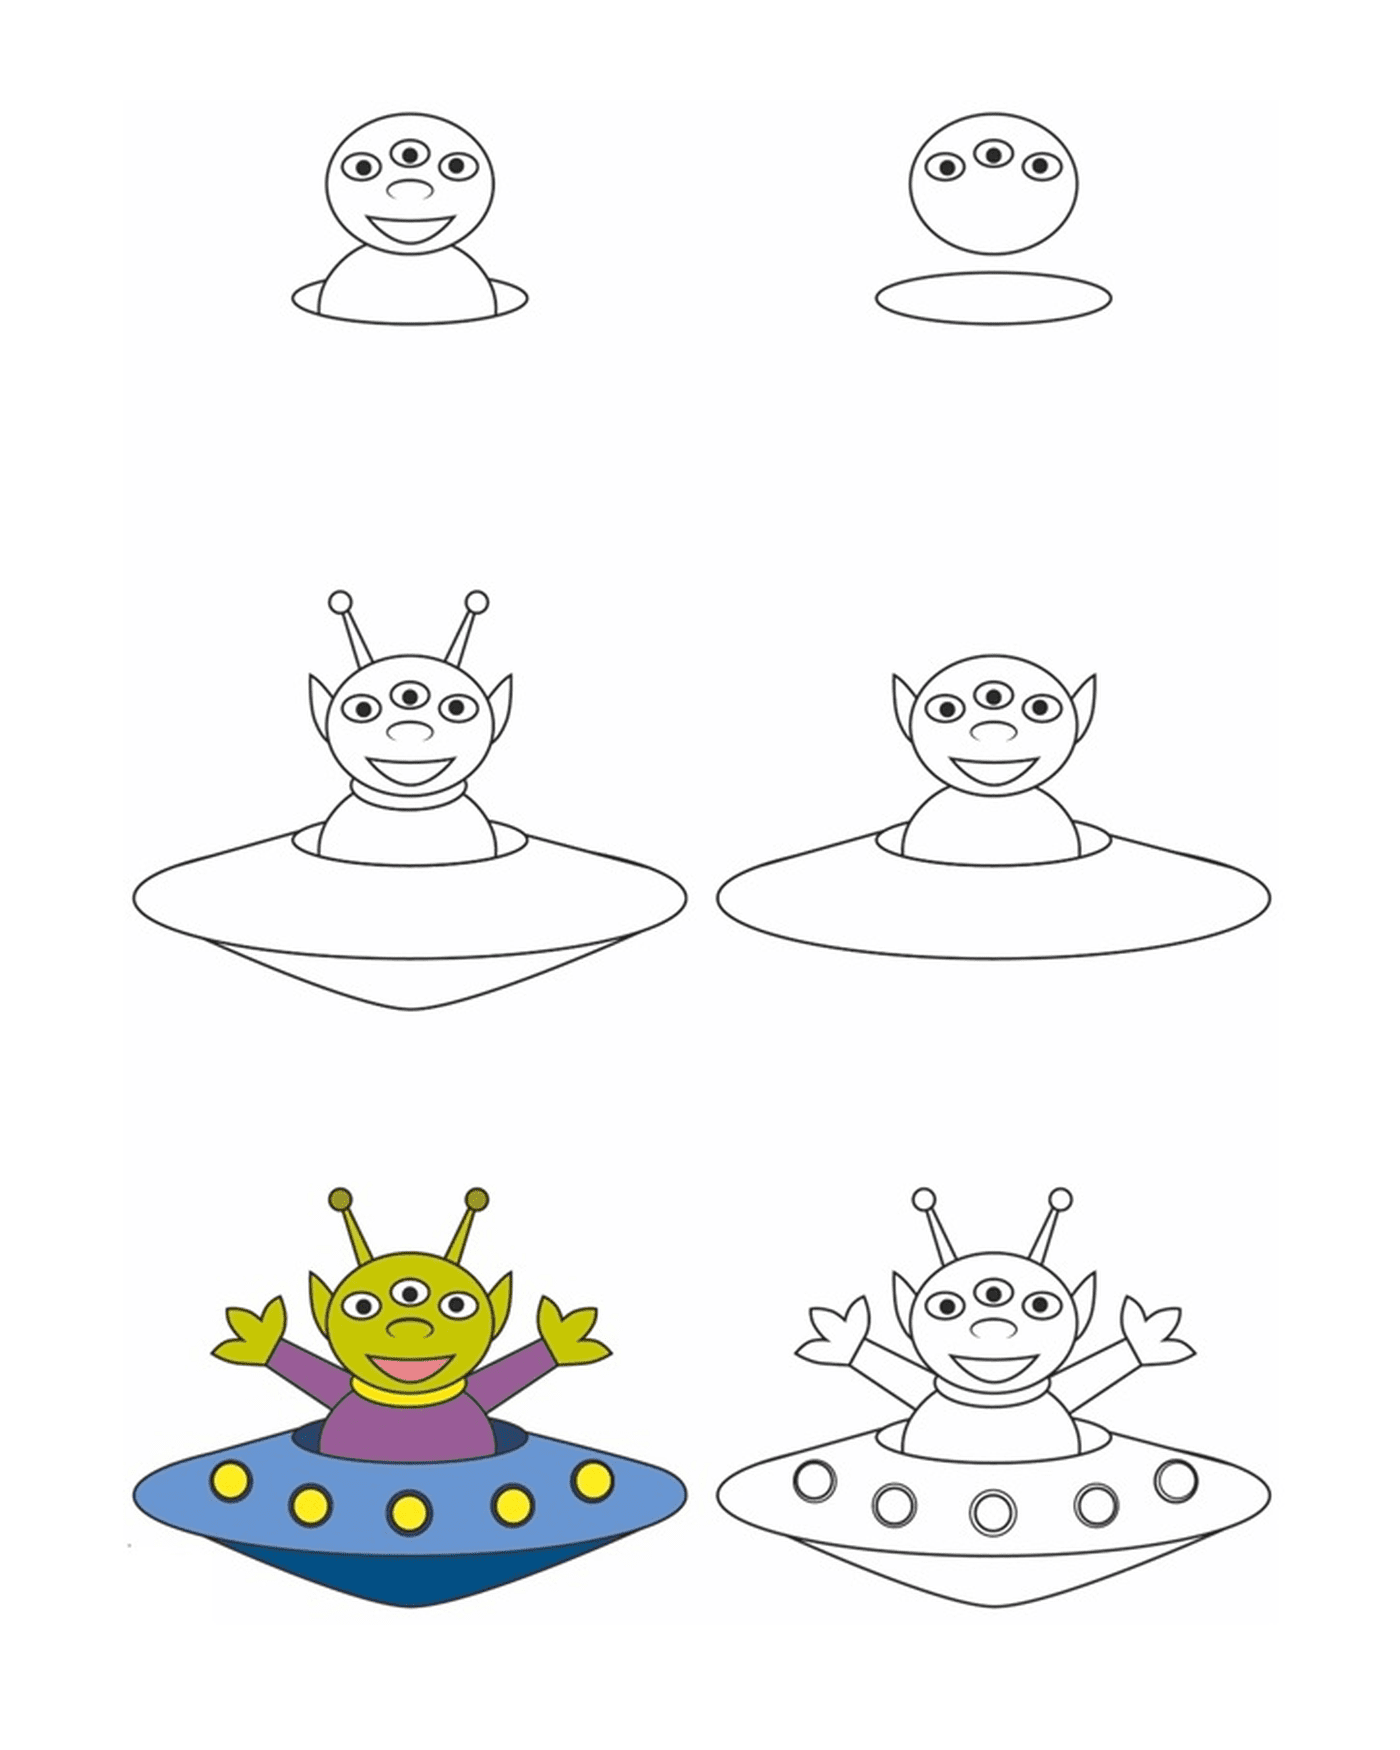  How to draw an alien 